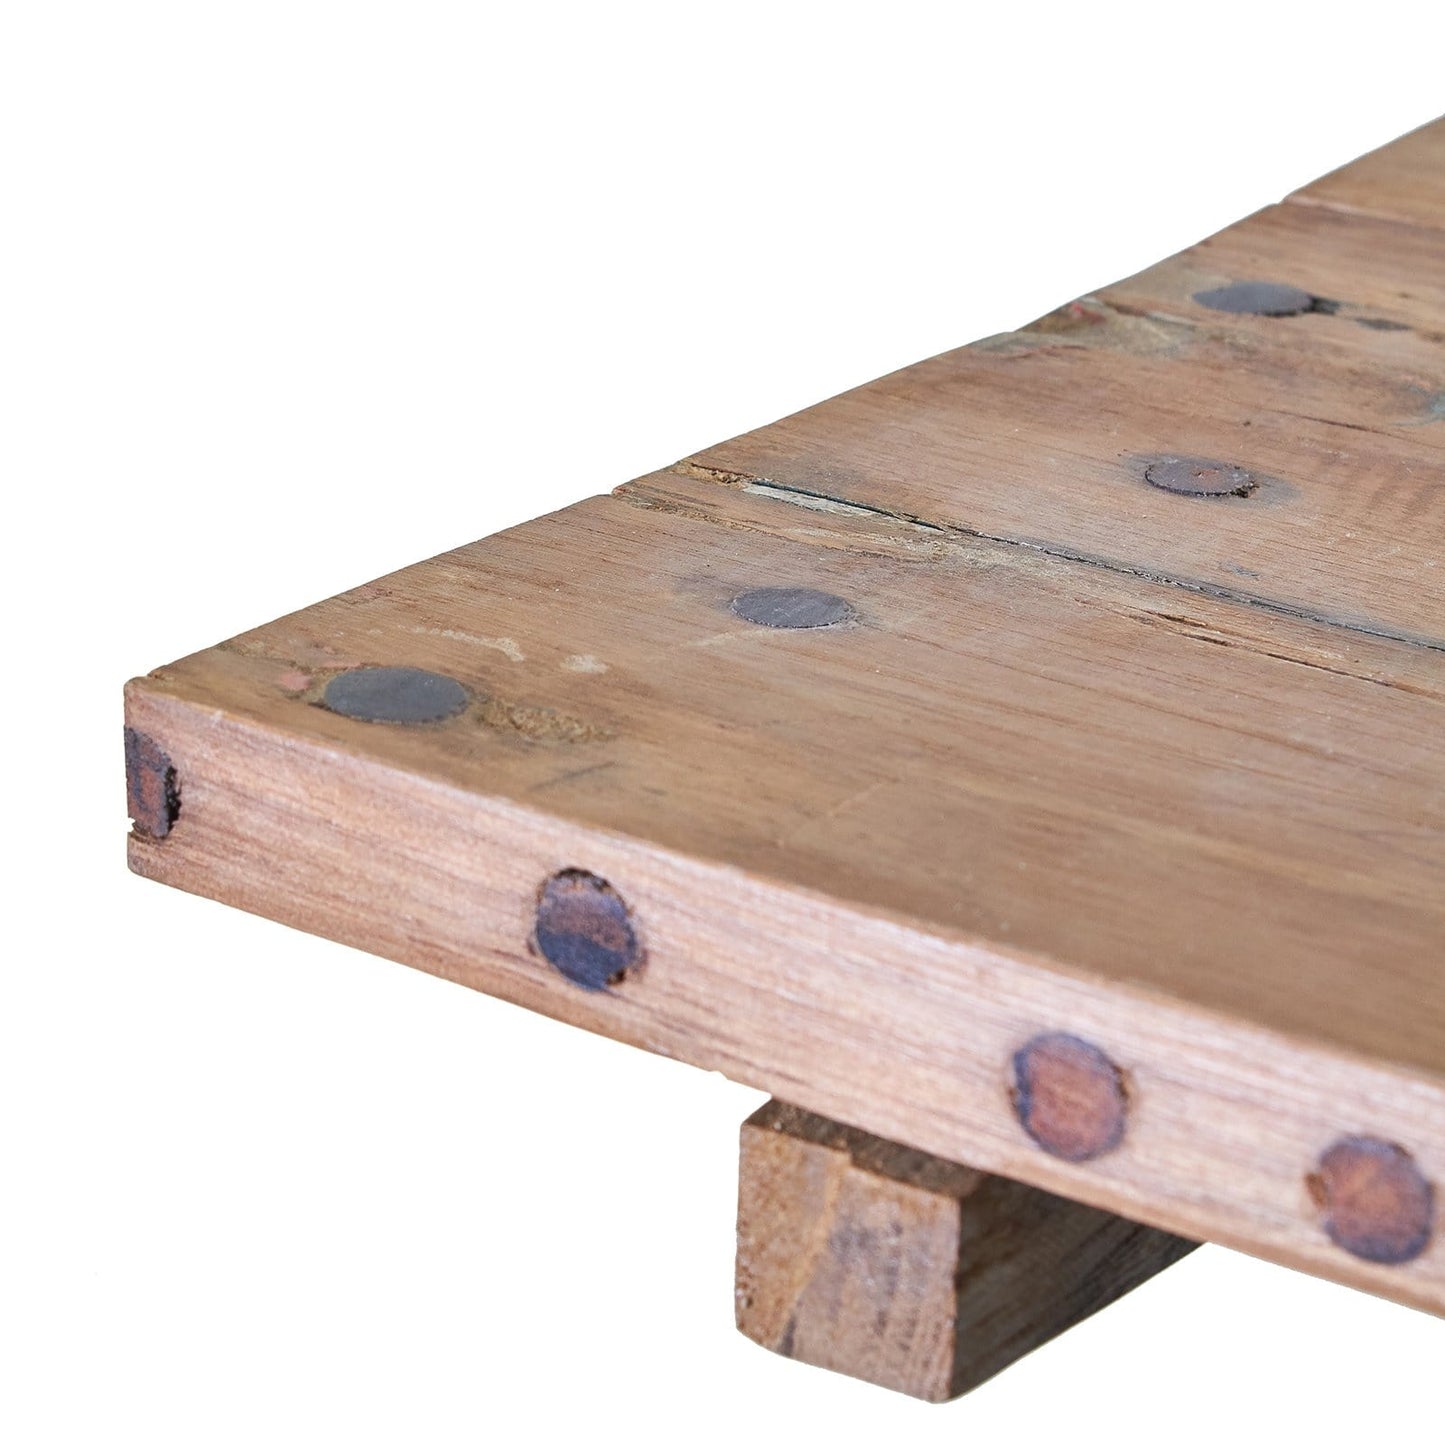 Square Folding Coffee Table - Recycled Teak Wood - ShopGreenToday